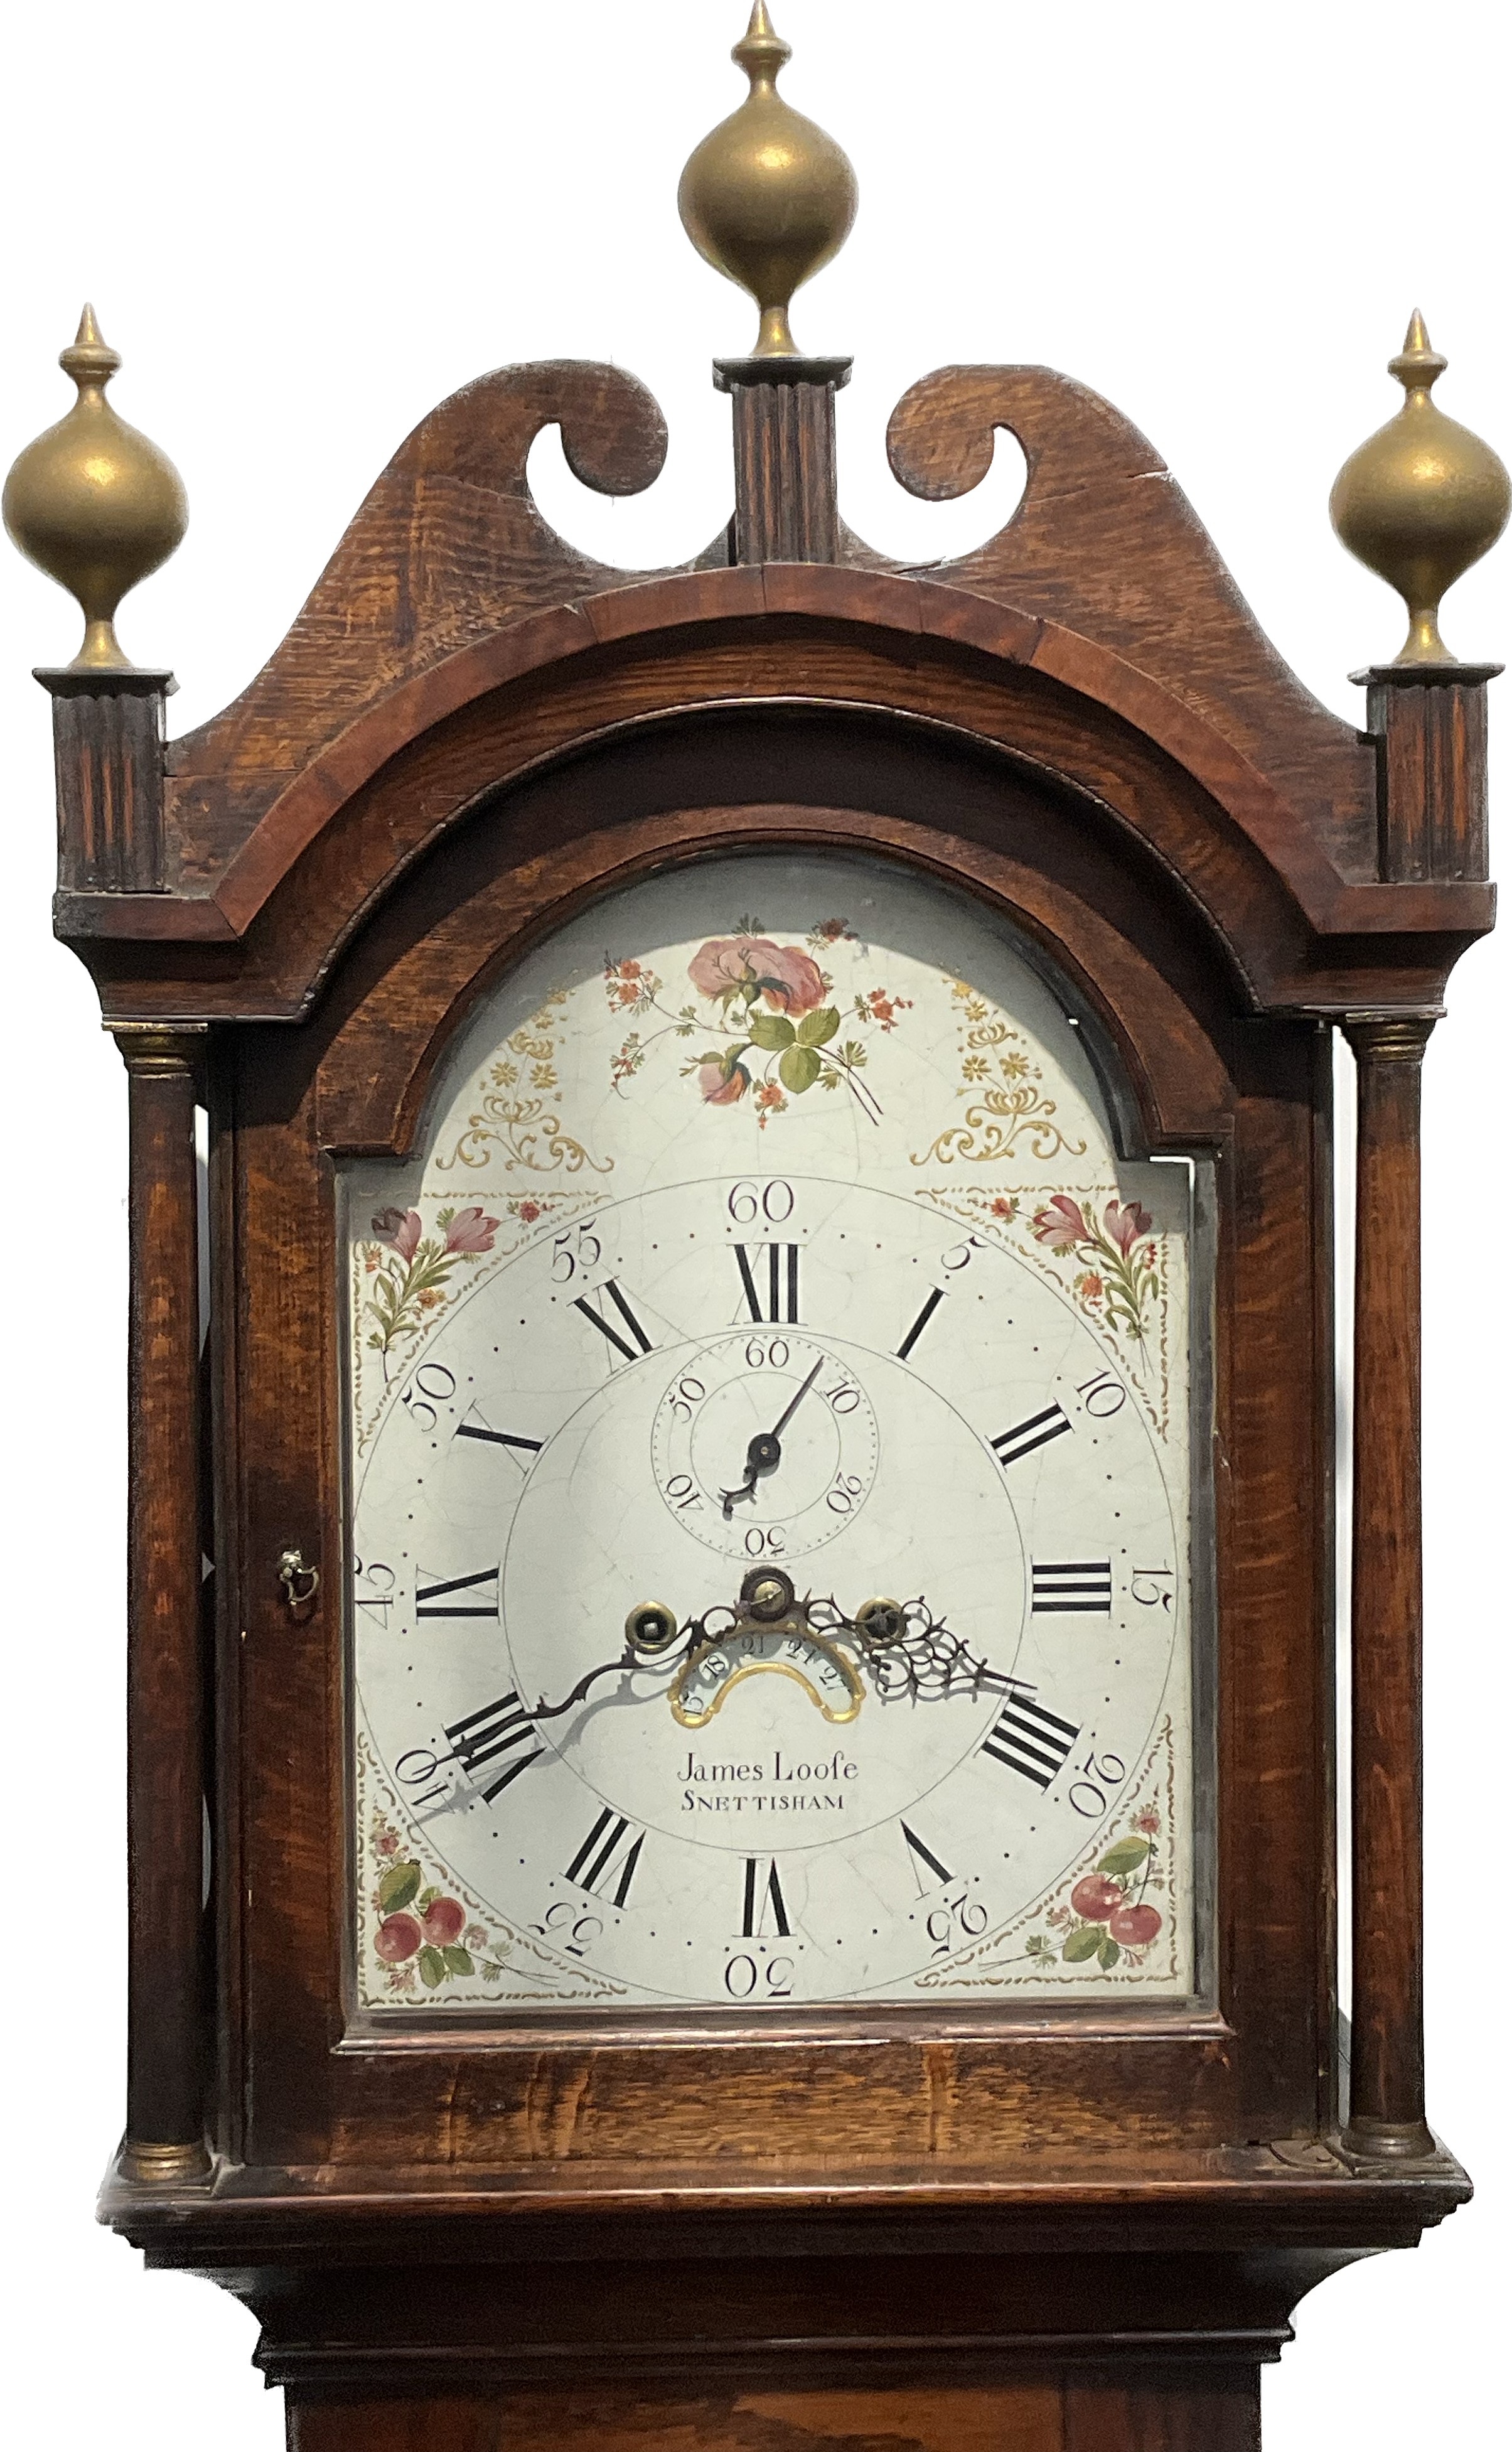 A Georgian James Loofe of Snettisham long case clock, floral and gilt enriched dial, second and